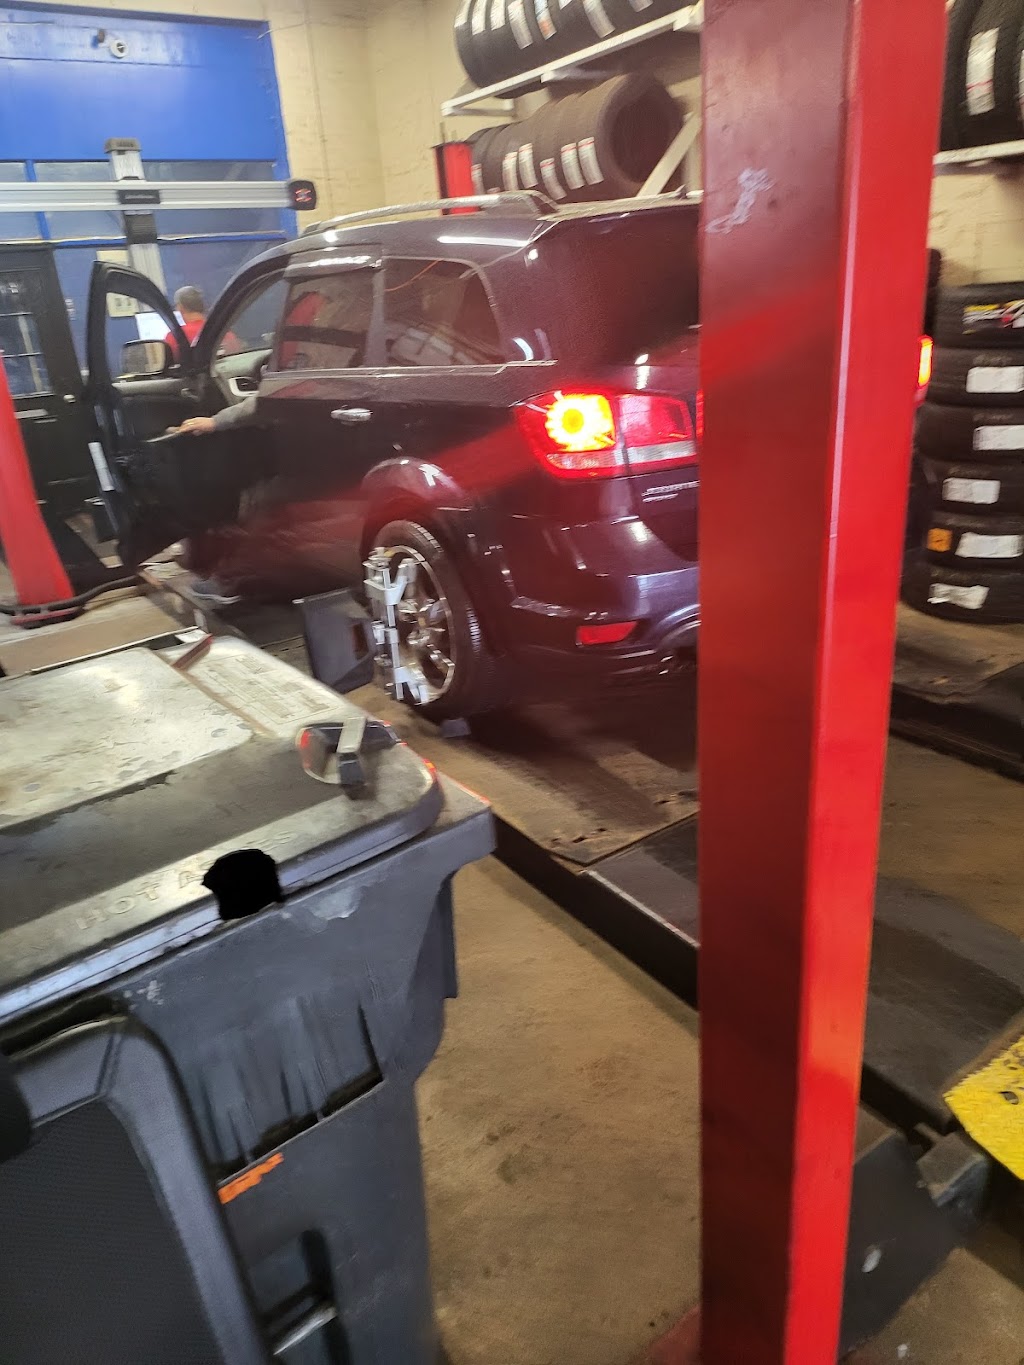 Express Tires LLC | 524 Wethersfield Ave, Hartford, CT 06114 | Phone: (860) 296-0147